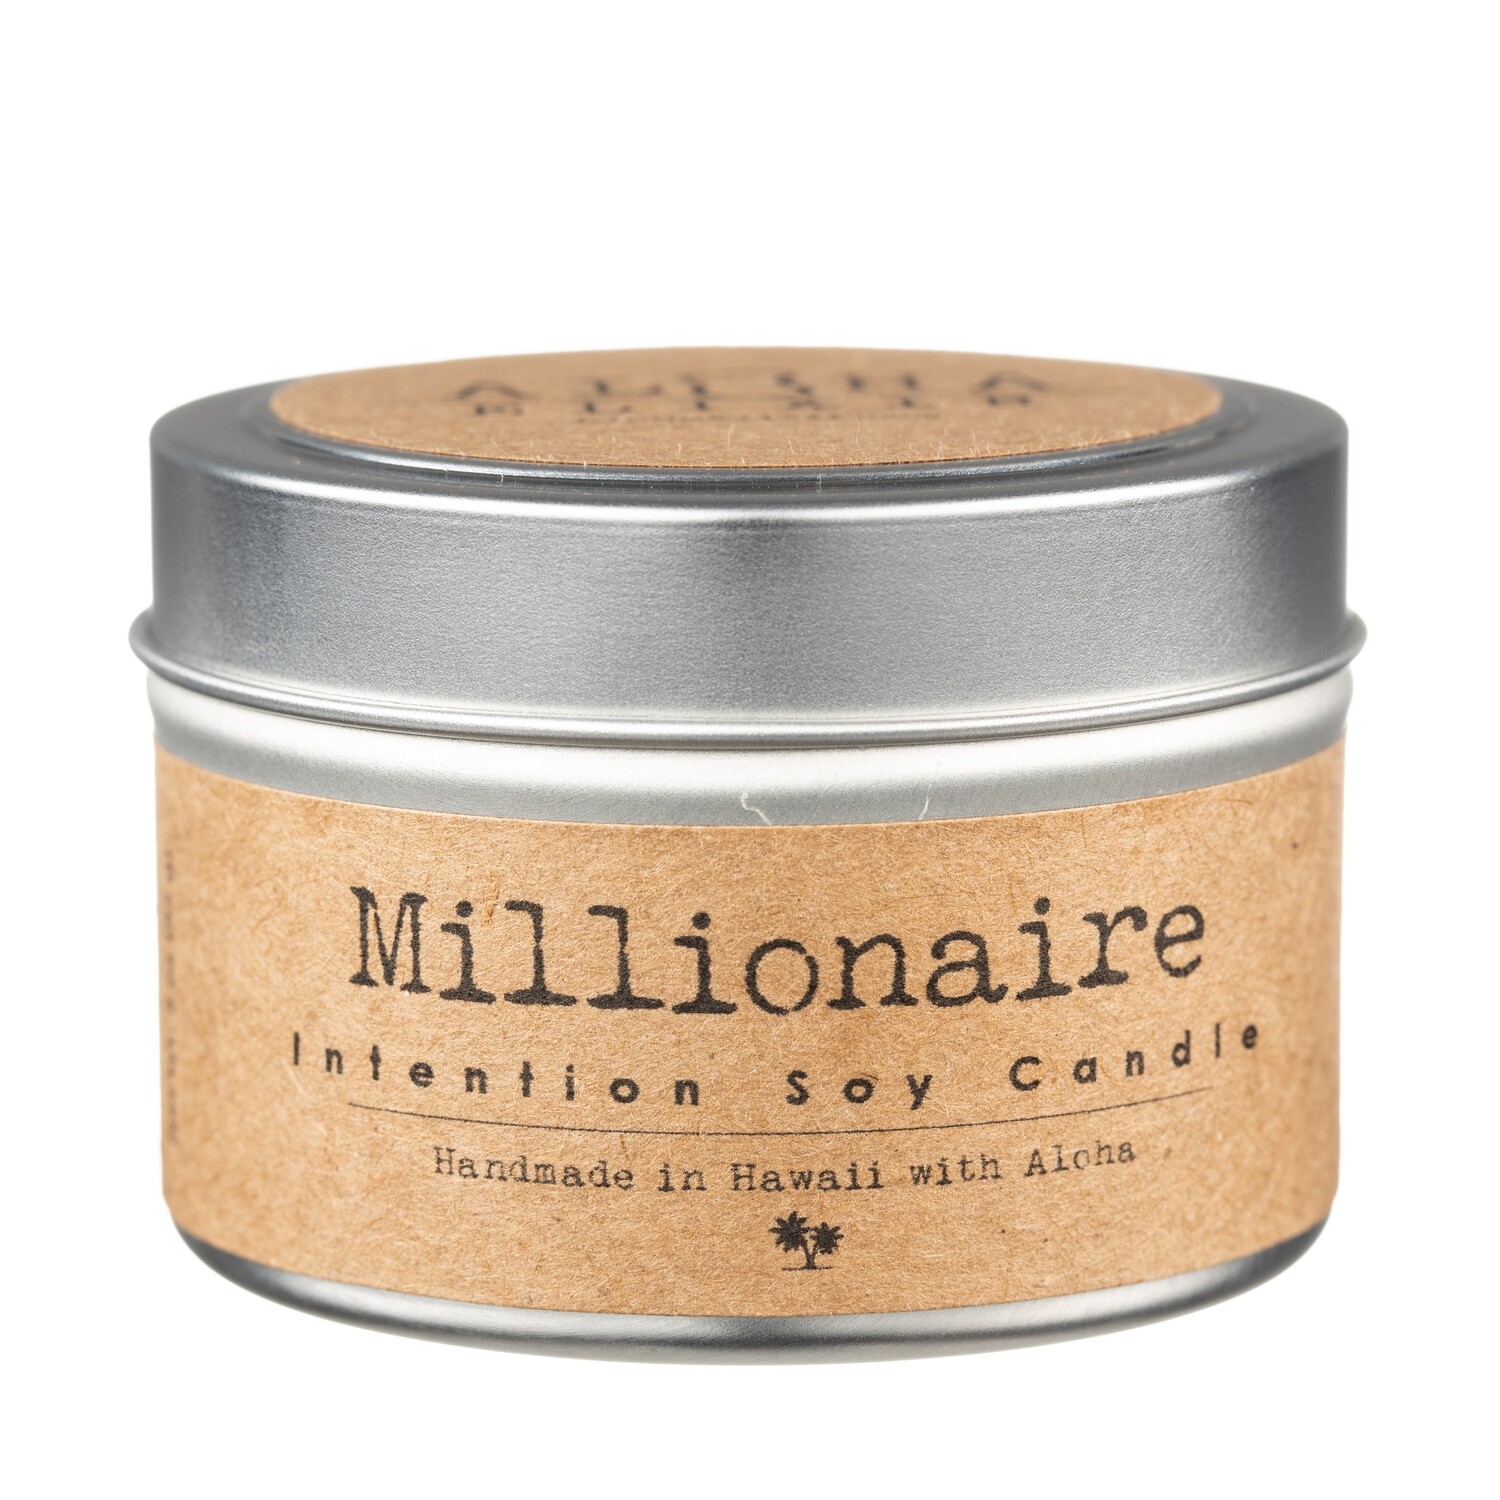 Millionaire Intention Soy Candle